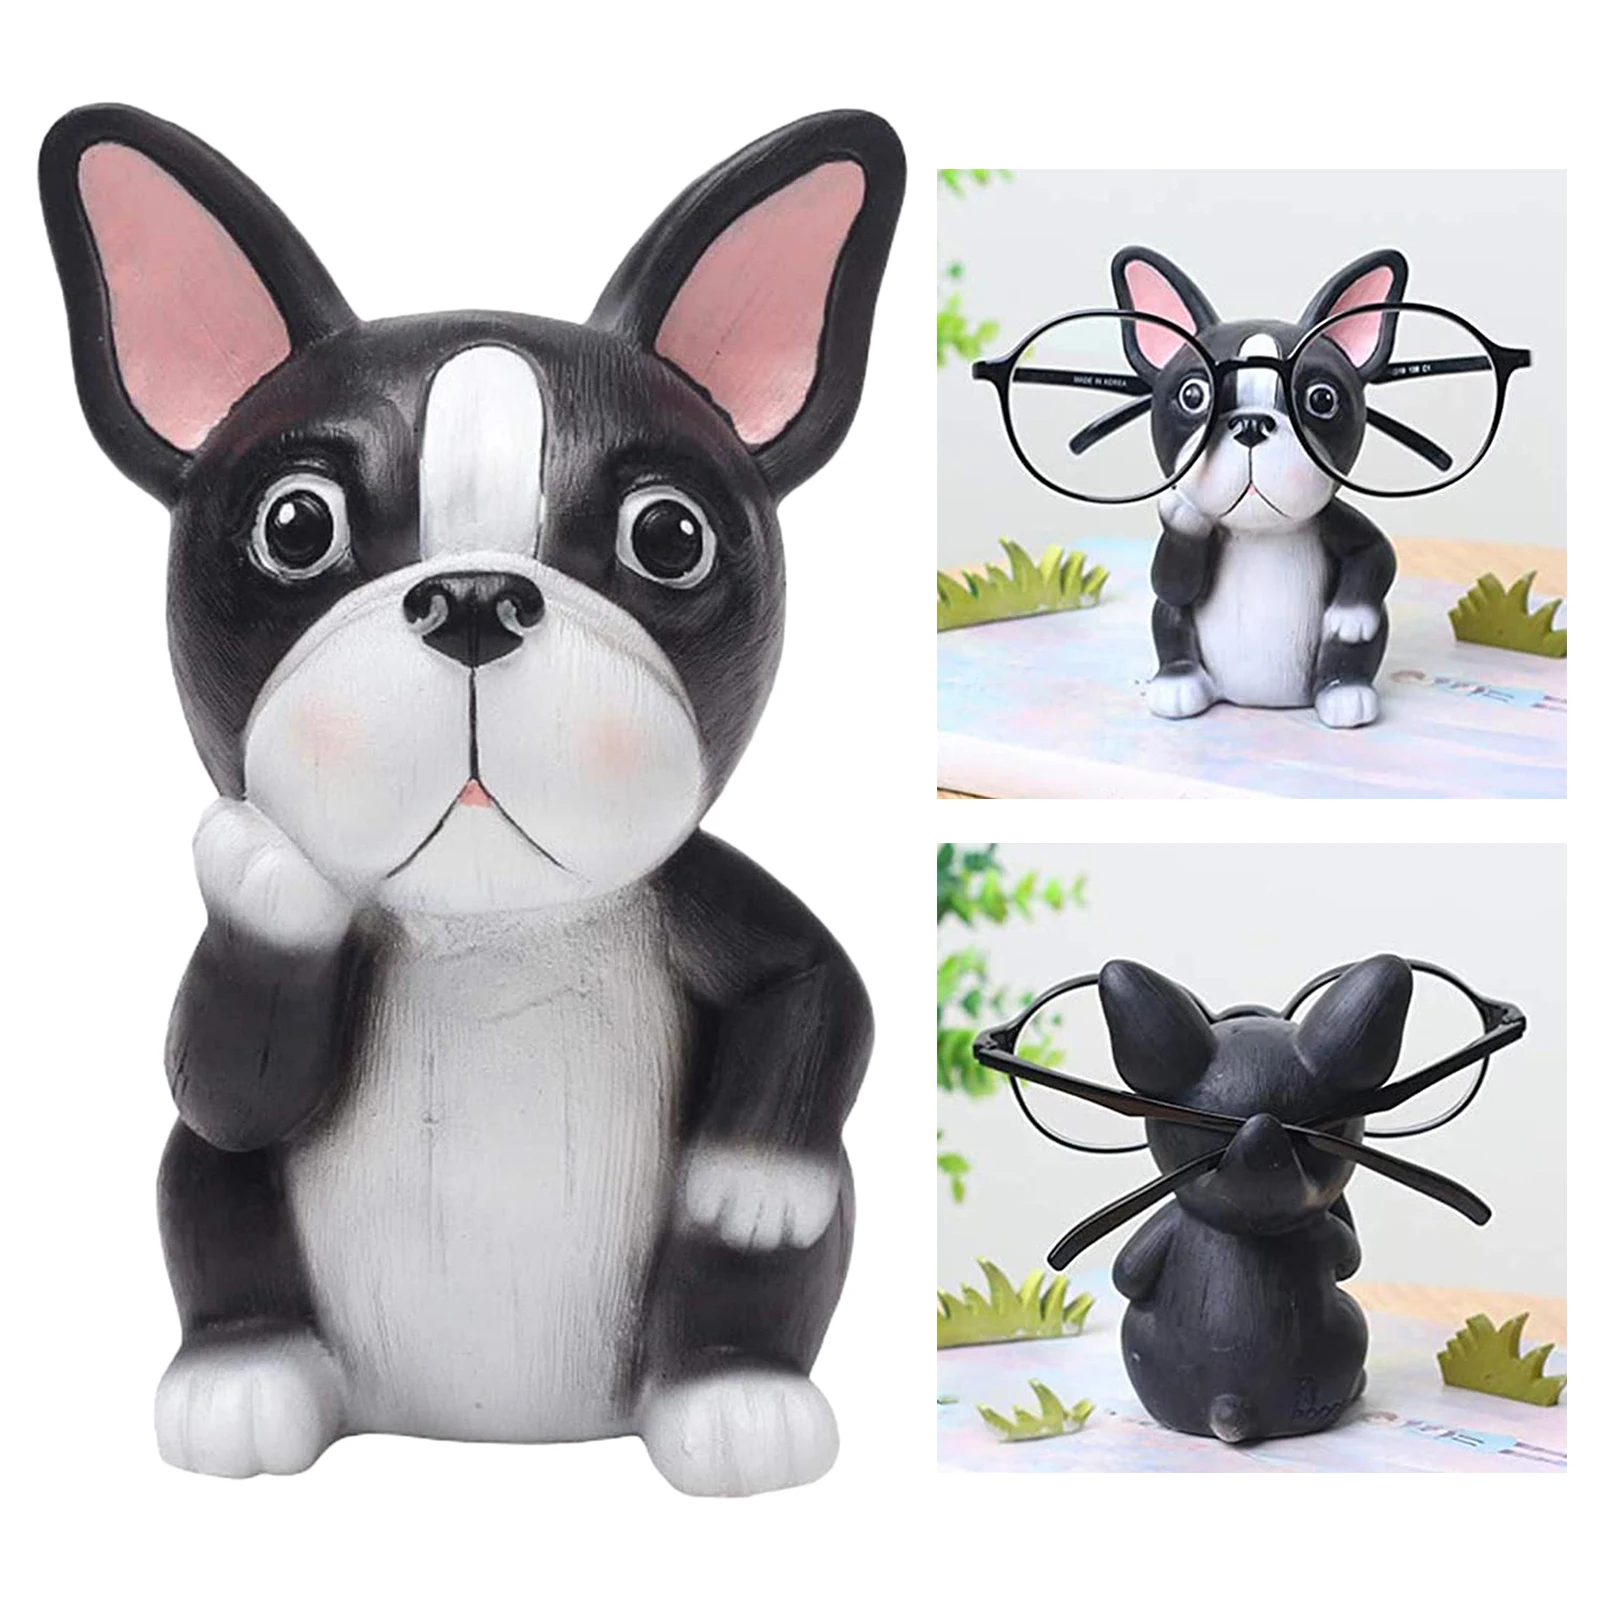 Puppy Dog Glasses Holder Stand Eyeglass Retainers Sunglasses Display Cute Animal Design Gift